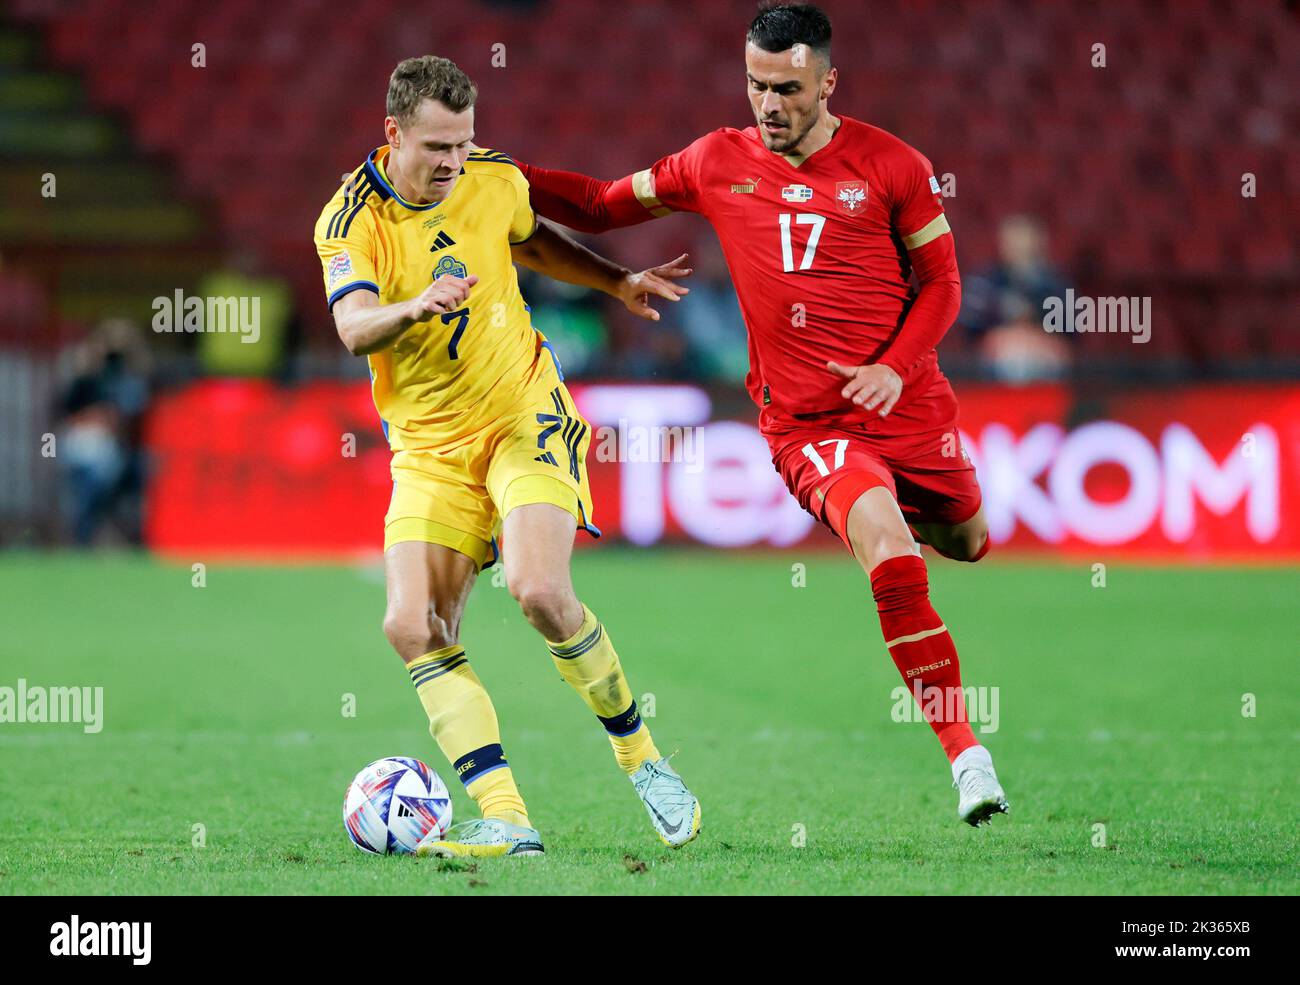 Belgrade, Serbia. 24th Sep, 2022. Sweden's Viktor Claesson (L) vies with Serbia's Filip Kostic during the League B Group 4 match at the 2022 UEFA Nations League in Belgrade, Serbia, Sept. 24, 2022. Credit: Predrag Milosavljevic/Xinhua/Alamy Live News Stock Photo